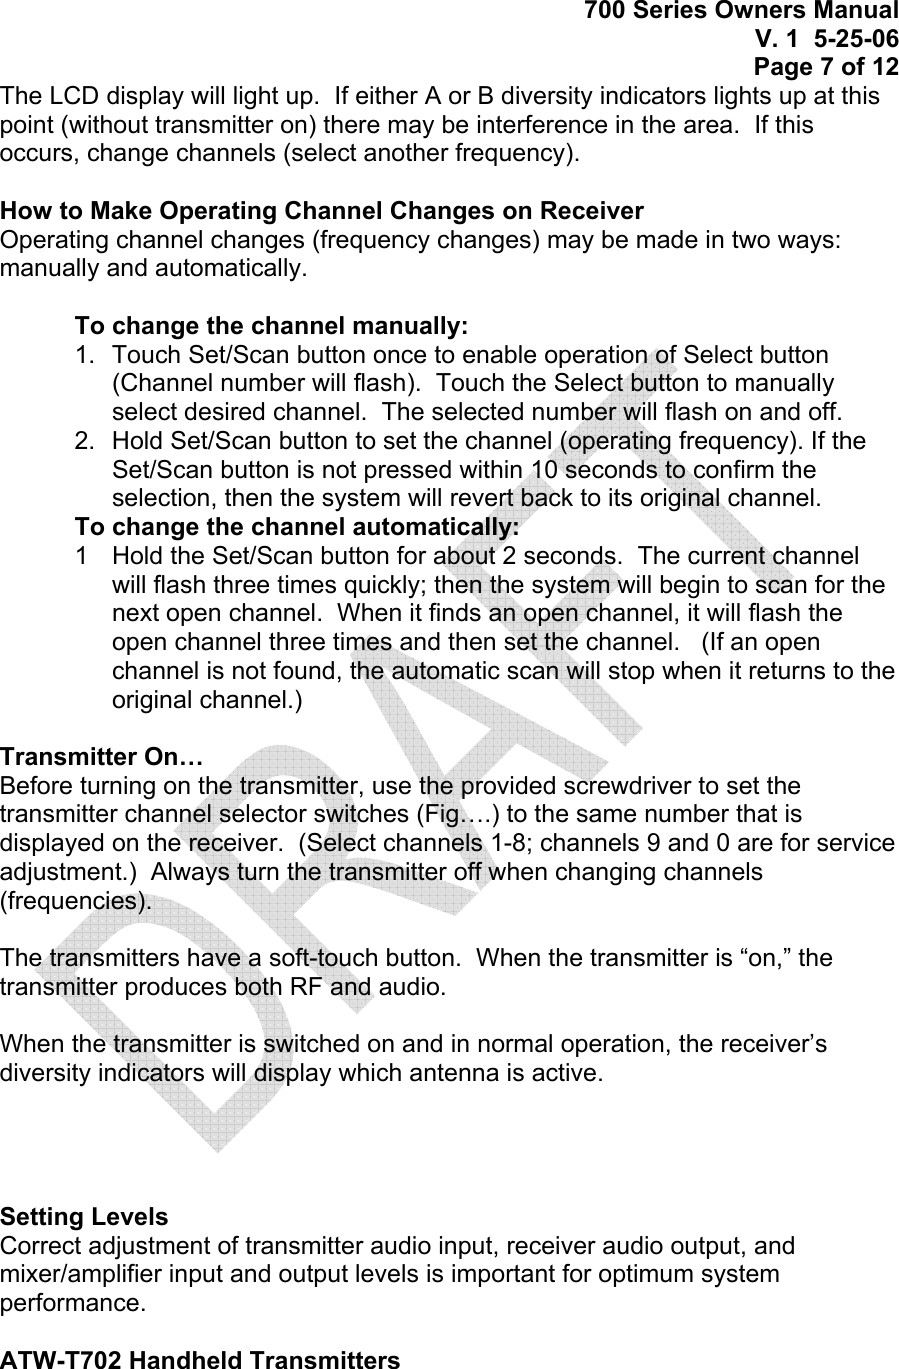 700 Series Owners Manual V. 1  5-25-06 Page 7 of 12 The LCD display will light up.  If either A or B diversity indicators lights up at this point (without transmitter on) there may be interference in the area.  If this occurs, change channels (select another frequency).  How to Make Operating Channel Changes on Receiver Operating channel changes (frequency changes) may be made in two ways: manually and automatically.  To change the channel manually:  1.  Touch Set/Scan button once to enable operation of Select button (Channel number will flash).  Touch the Select button to manually select desired channel.  The selected number will flash on and off. 2.  Hold Set/Scan button to set the channel (operating frequency). If the Set/Scan button is not pressed within 10 seconds to confirm the selection, then the system will revert back to its original channel. To change the channel automatically:  1  Hold the Set/Scan button for about 2 seconds.  The current channel will flash three times quickly; then the system will begin to scan for the next open channel.  When it finds an open channel, it will flash the open channel three times and then set the channel.   (If an open channel is not found, the automatic scan will stop when it returns to the original channel.)  Transmitter On… Before turning on the transmitter, use the provided screwdriver to set the transmitter channel selector switches (Fig….) to the same number that is displayed on the receiver.  (Select channels 1-8; channels 9 and 0 are for service adjustment.)  Always turn the transmitter off when changing channels (frequencies).  The transmitters have a soft-touch button.  When the transmitter is “on,” the transmitter produces both RF and audio.  When the transmitter is switched on and in normal operation, the receiver’s diversity indicators will display which antenna is active.      Setting Levels Correct adjustment of transmitter audio input, receiver audio output, and mixer/amplifier input and output levels is important for optimum system performance.  ATW-T702 Handheld Transmitters 